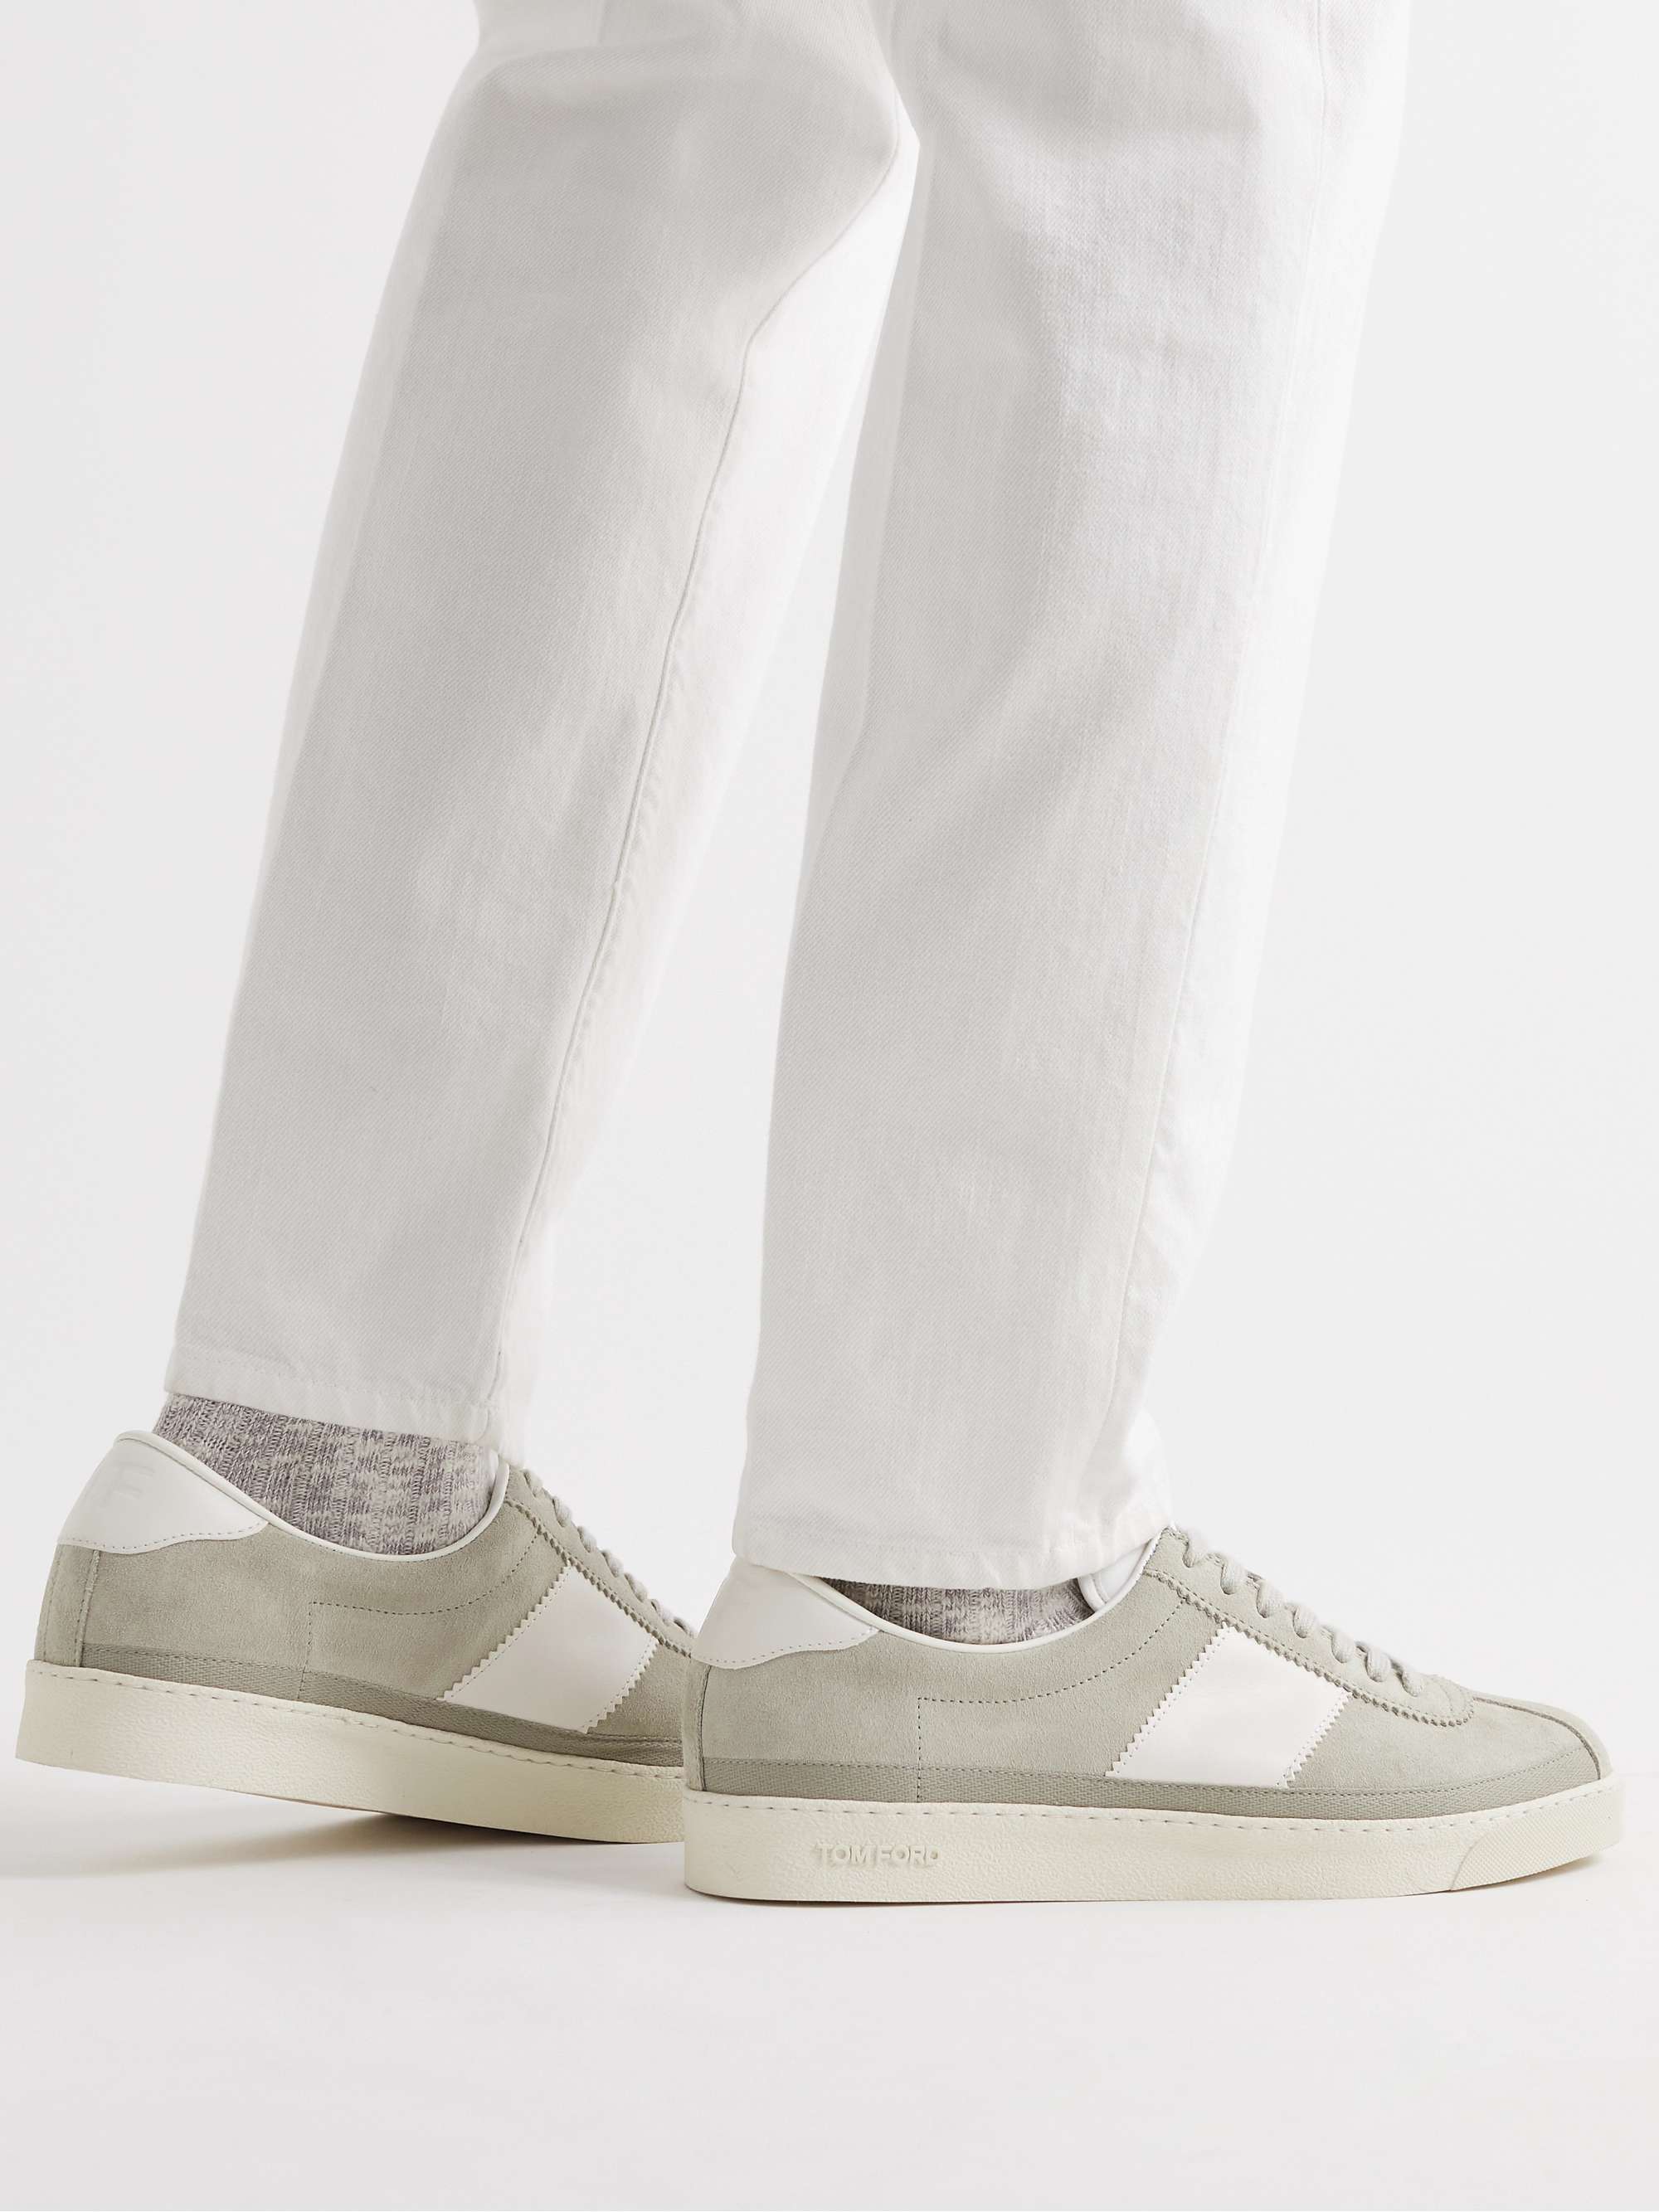 TOM FORD Bannister Leather-Trimmed Suede Sneakers